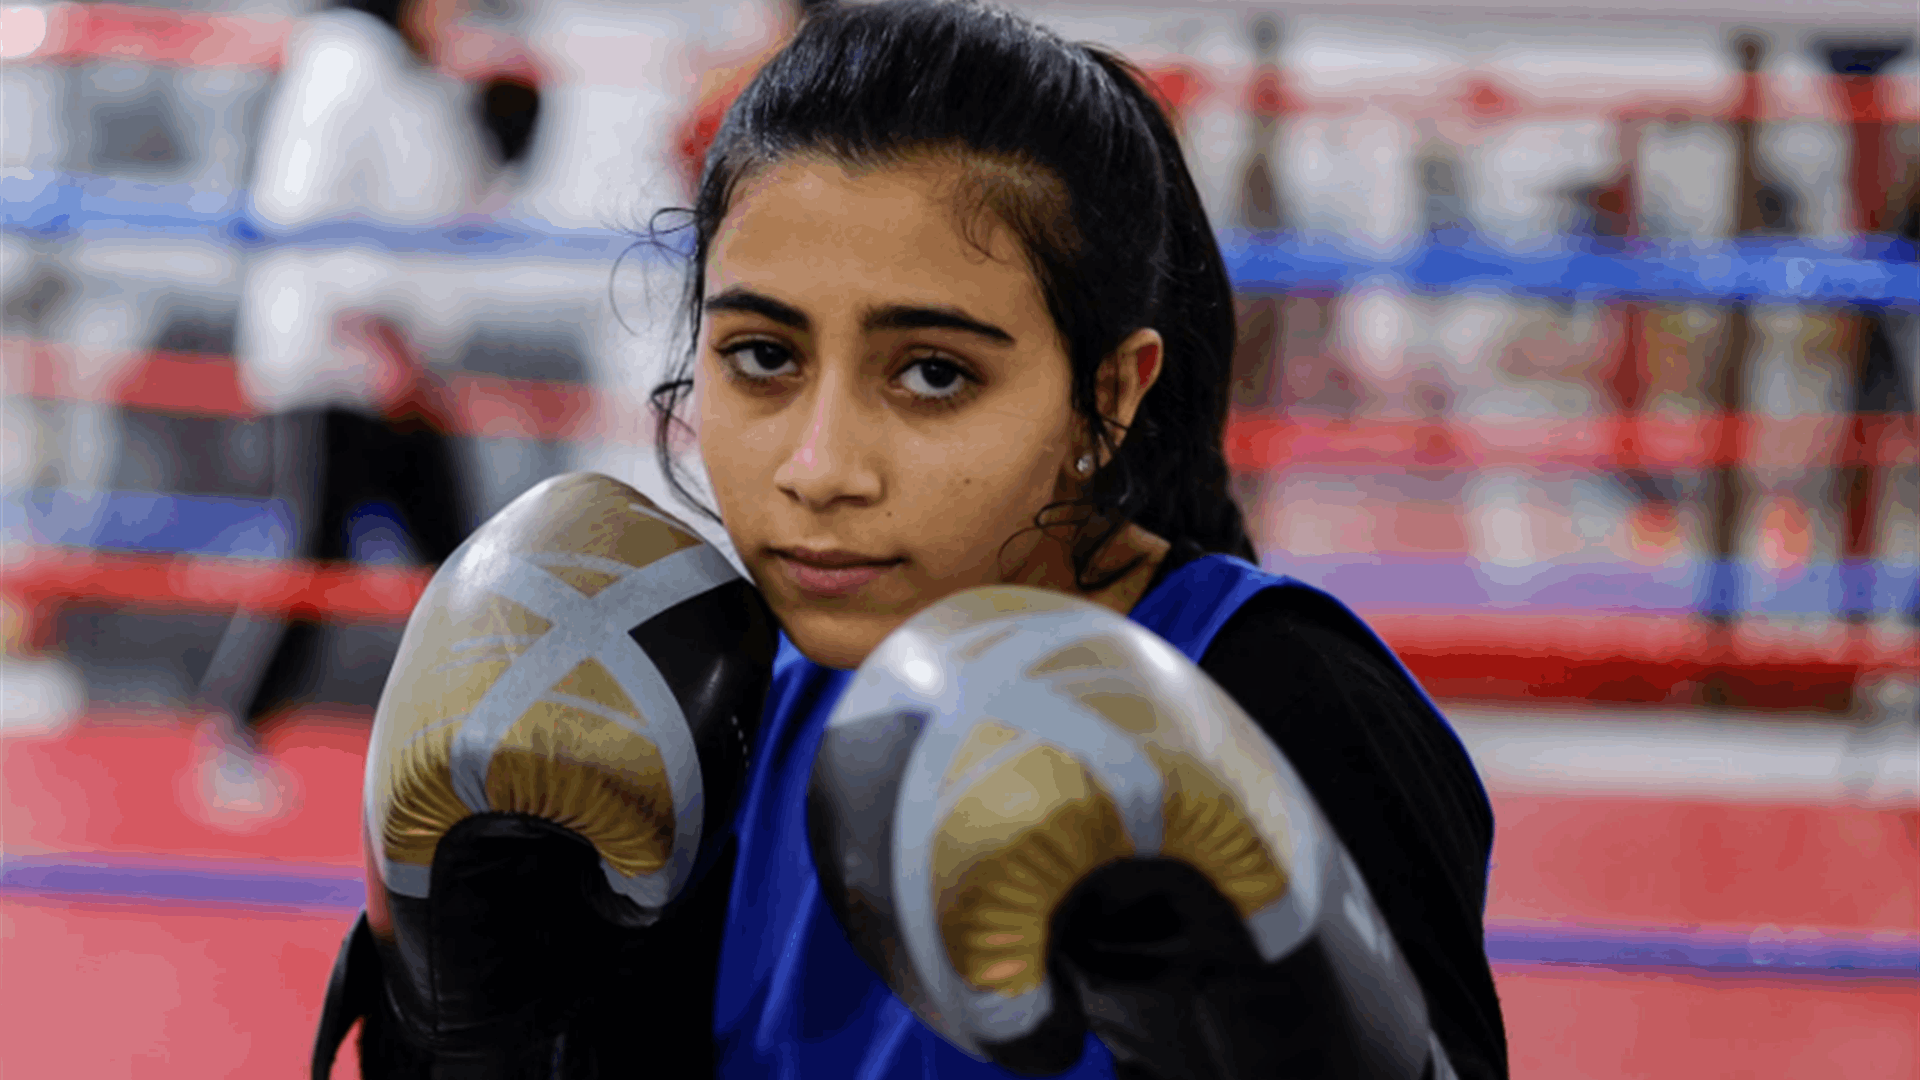 First Boxing Club opens doors to women in Gaza